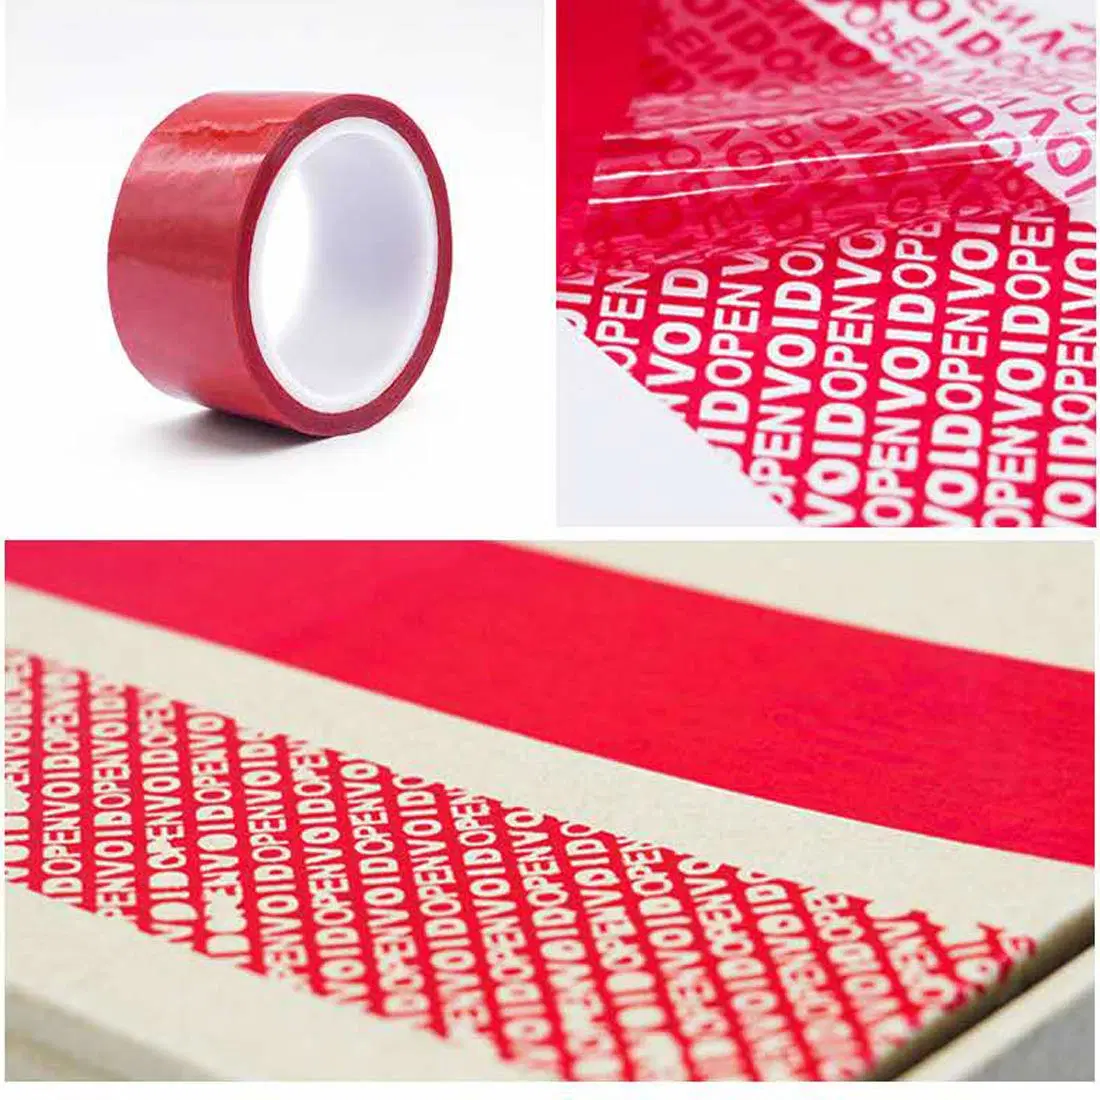 Counterfeiting Tamper Anti-Forgery Label Anti-Theft Adhesive Security Tape